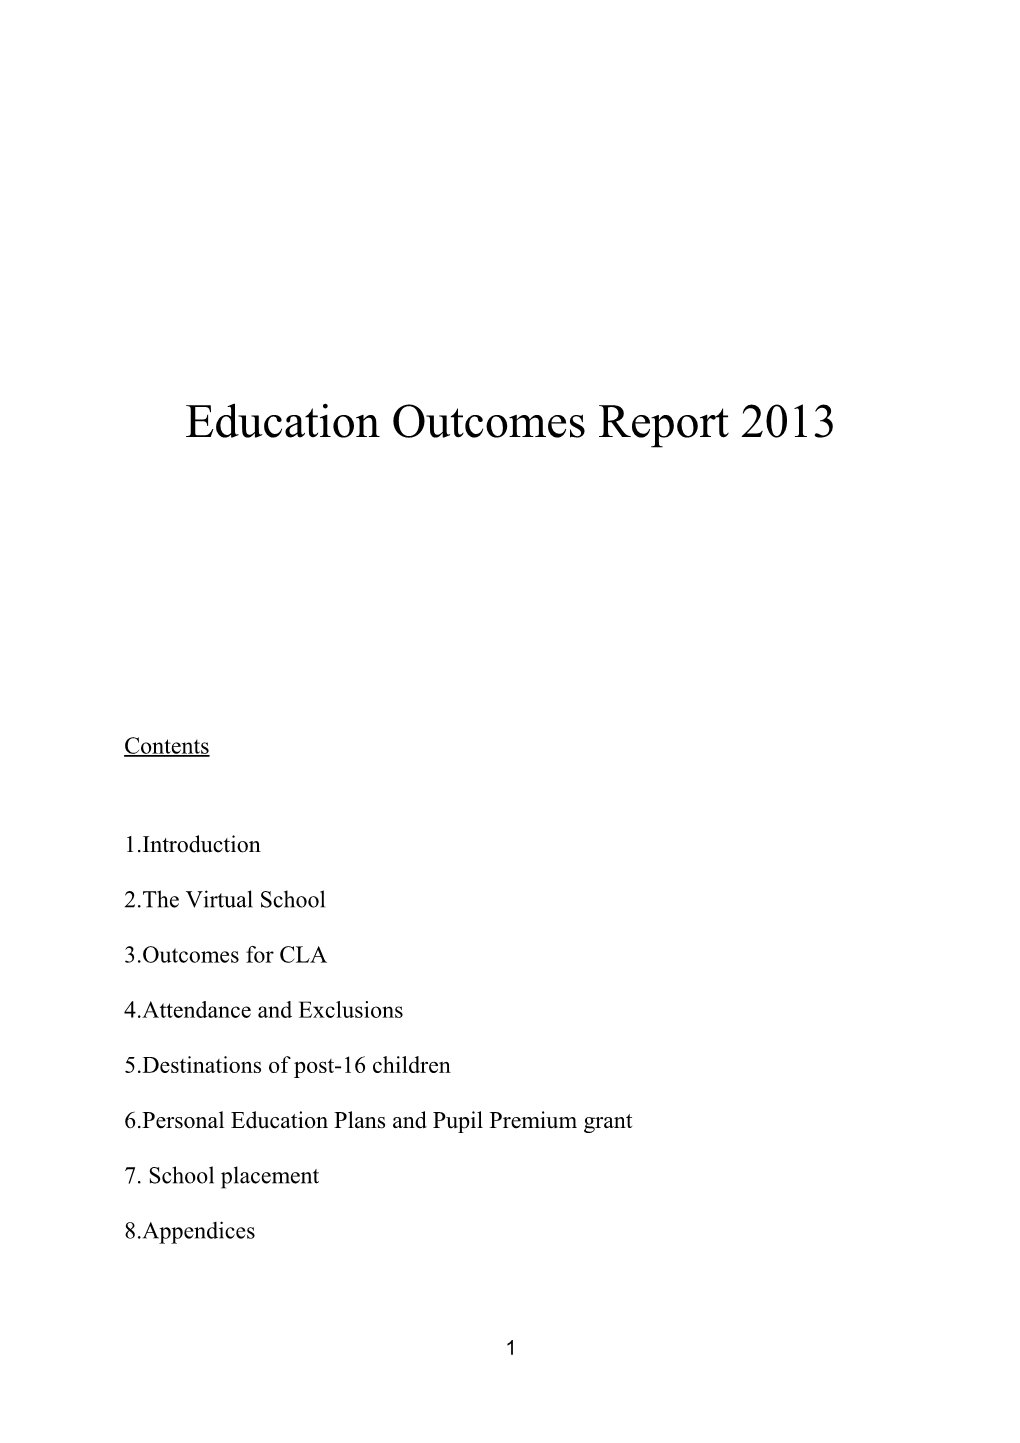 Education Outcomes Report 2013